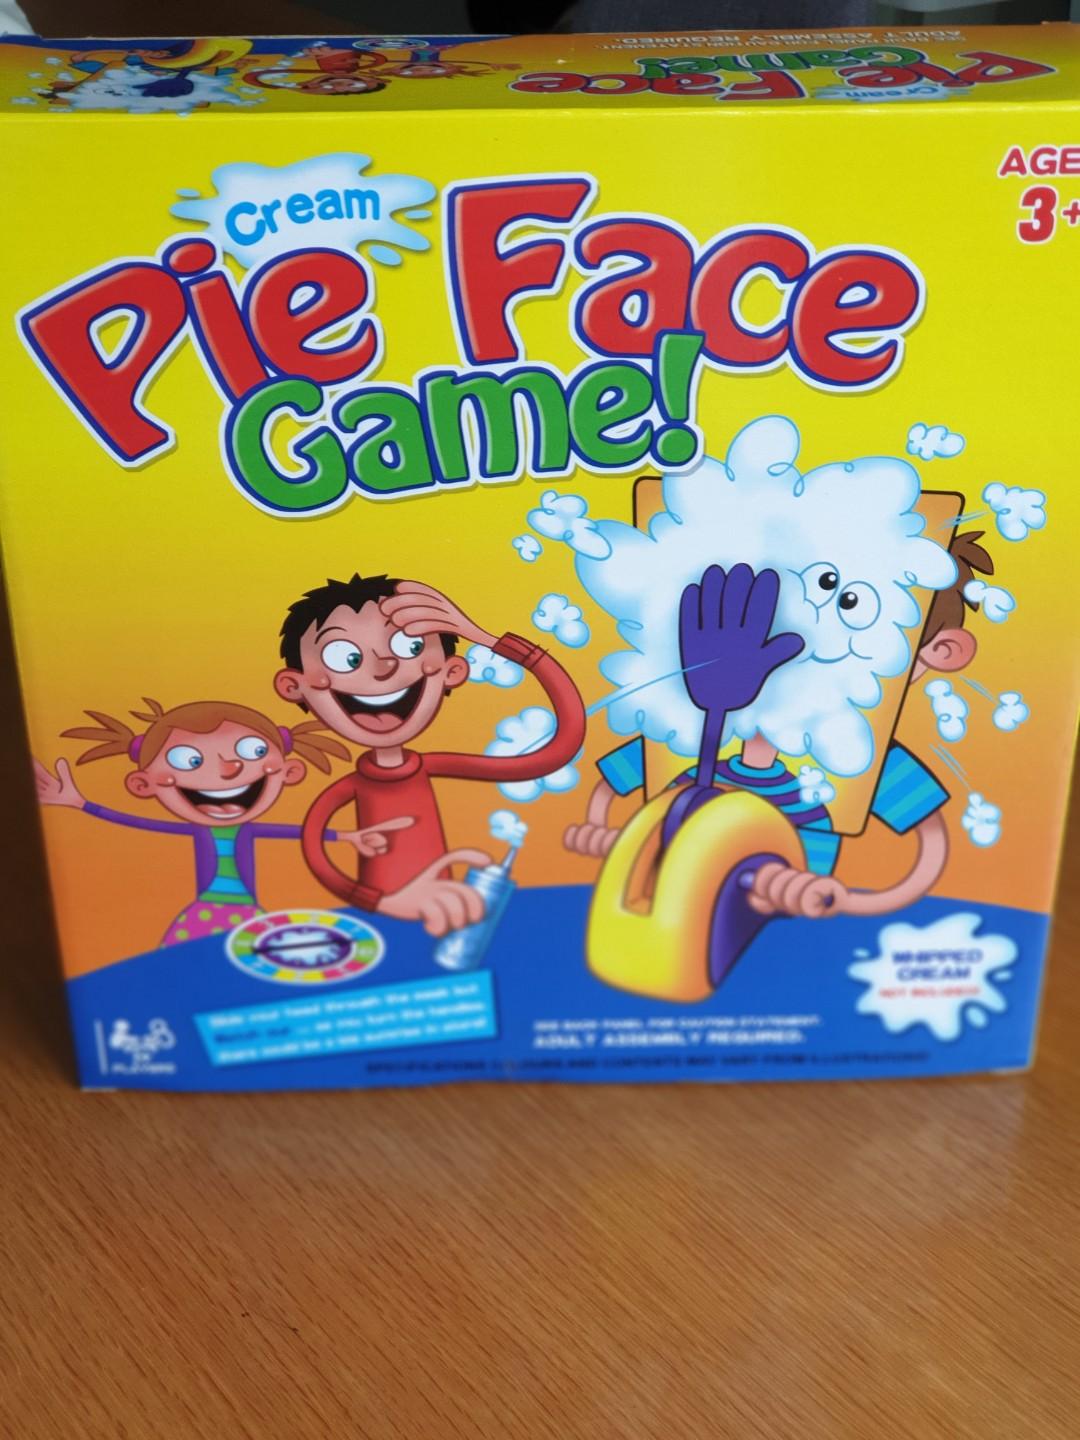 the new pie face game